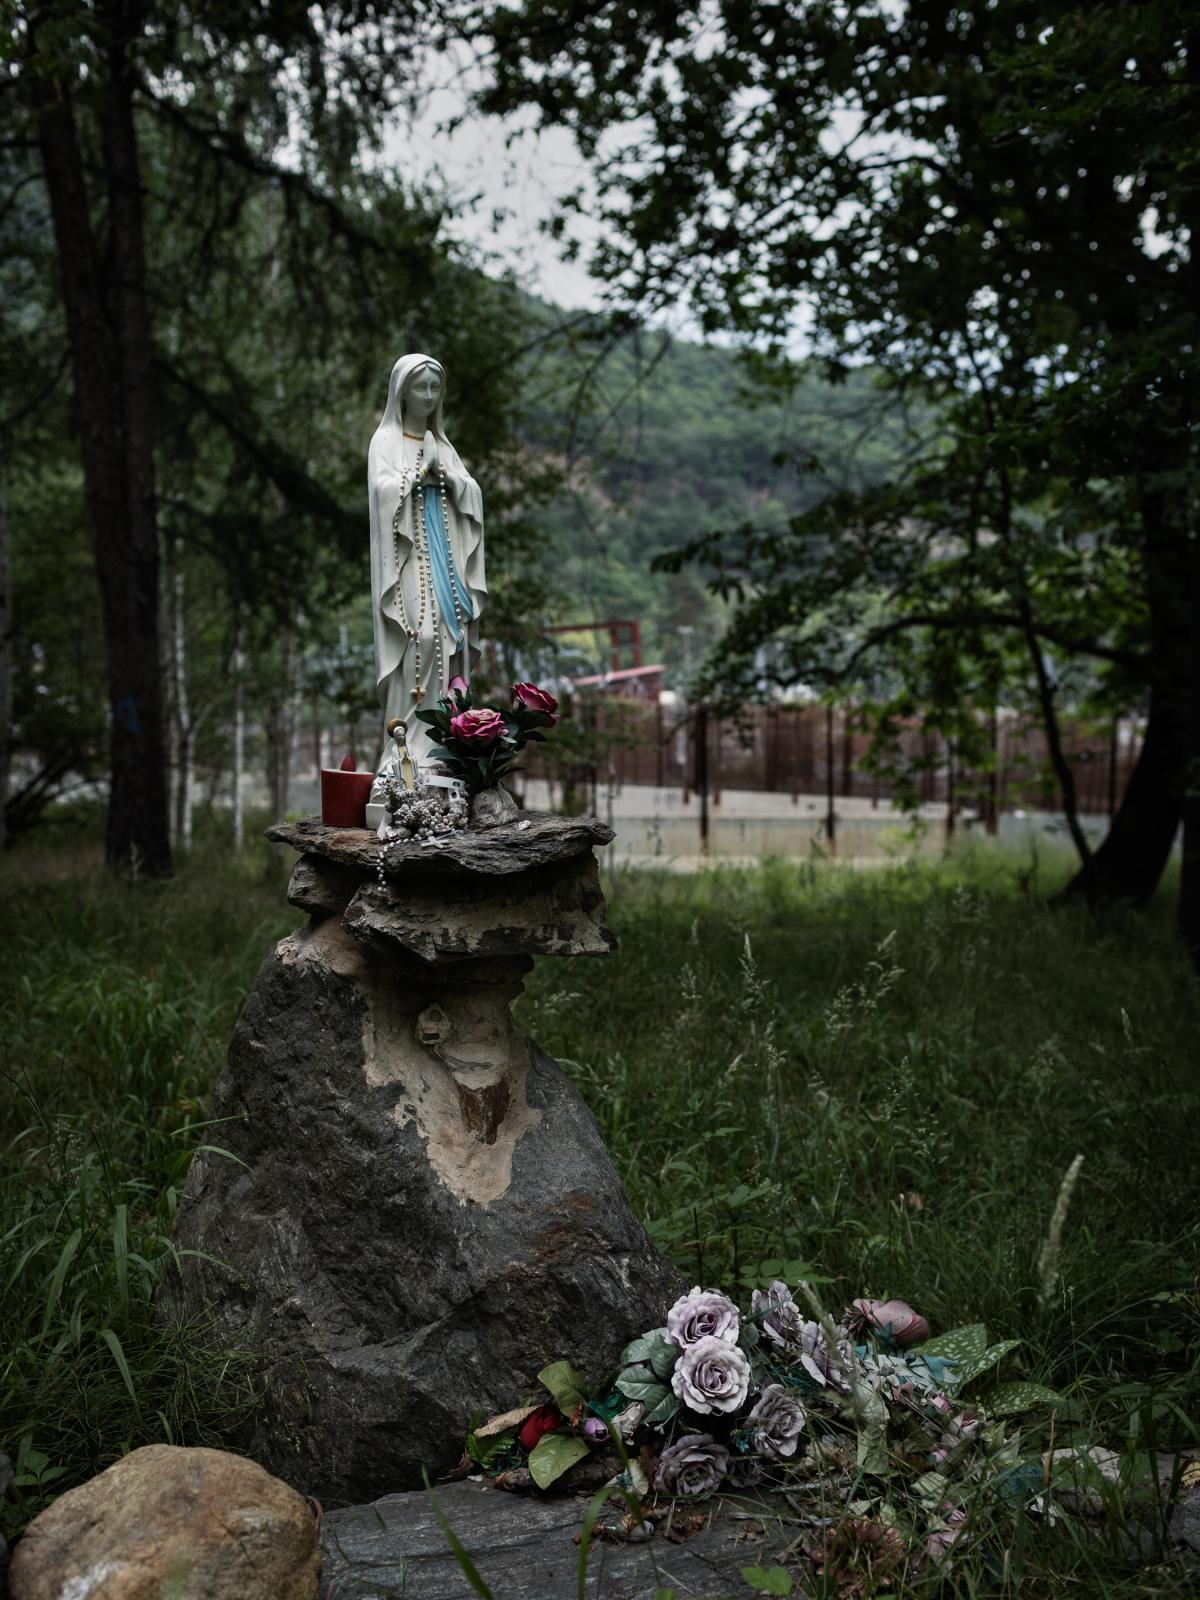 We are still dreaming - on going - A Statue of Our Lady, a symbolic and pilgrimage site by...